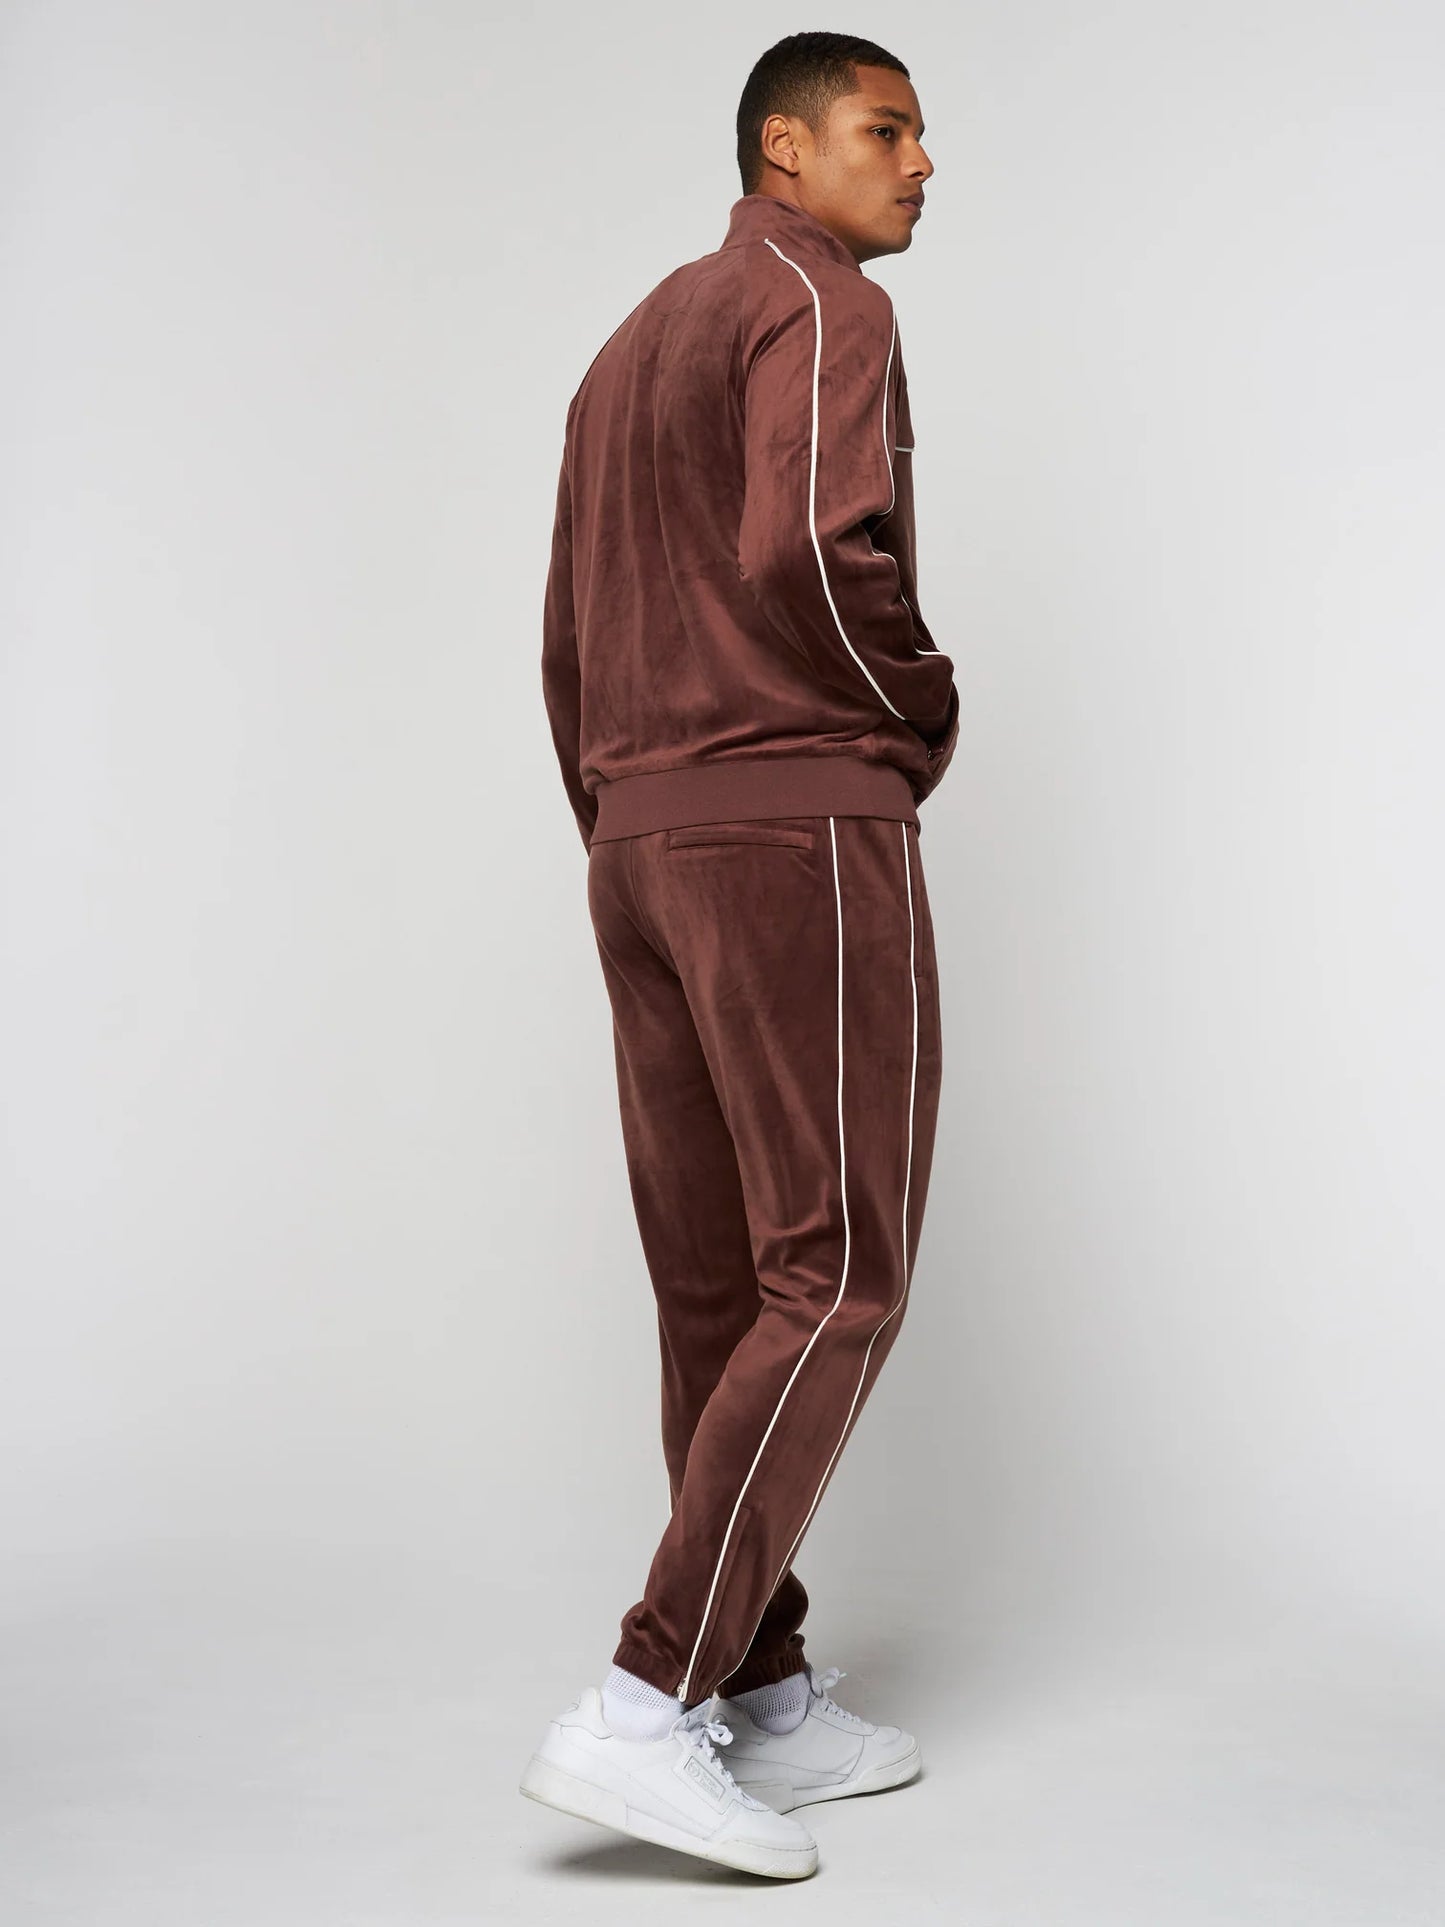 LIONI VELOUR (Only sold as a set) - DEEP MAHOGANY